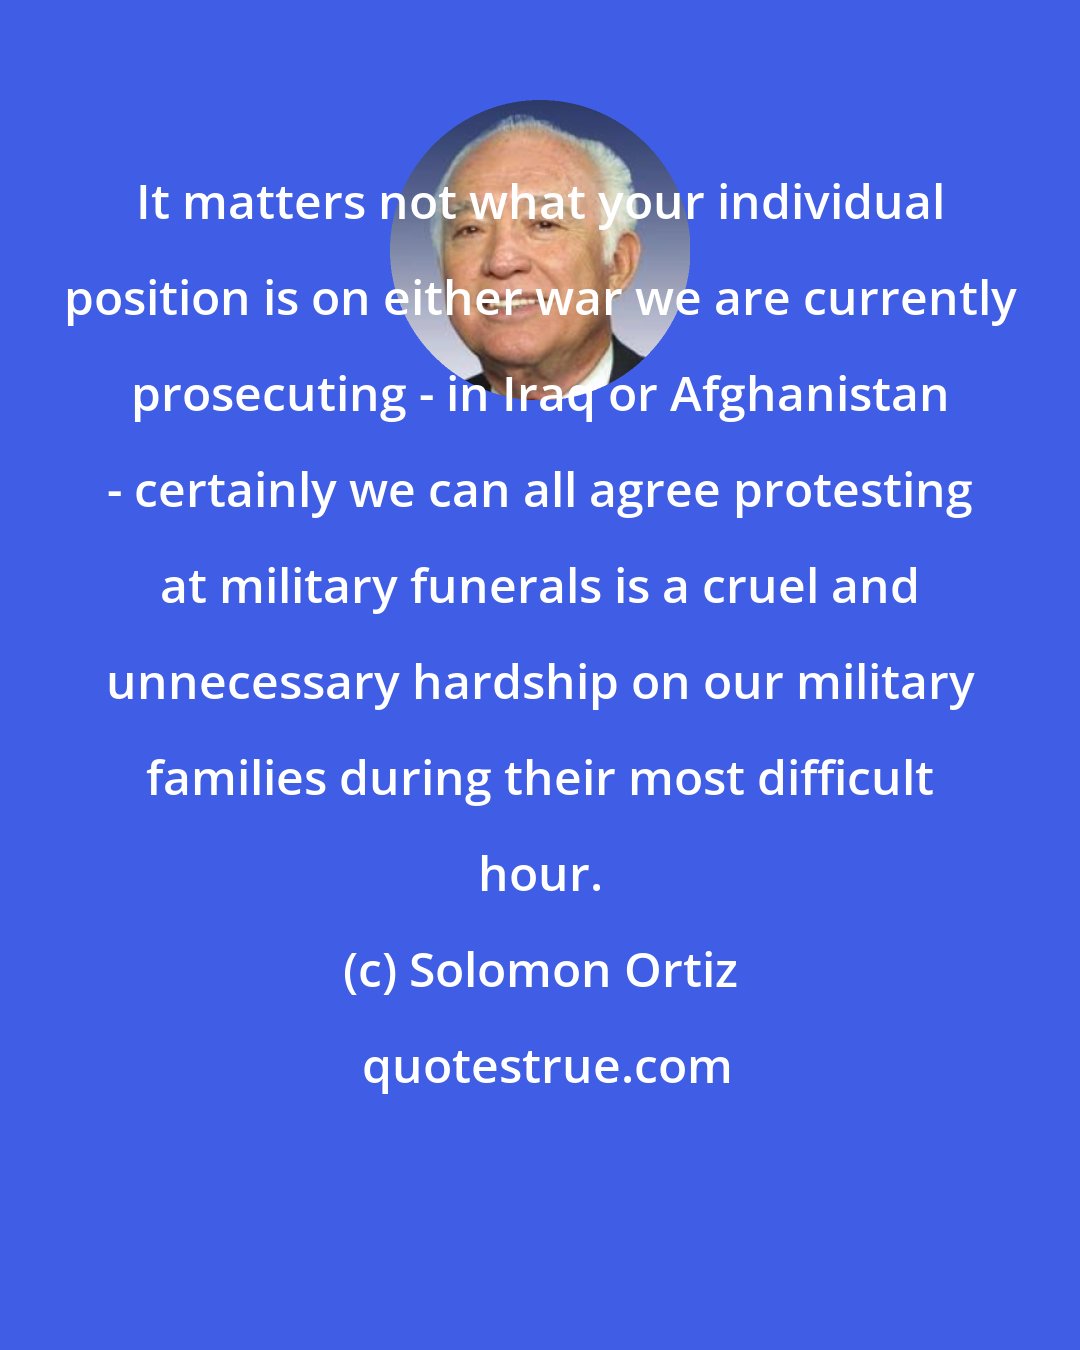 Solomon Ortiz: It matters not what your individual position is on either war we are currently prosecuting - in Iraq or Afghanistan - certainly we can all agree protesting at military funerals is a cruel and unnecessary hardship on our military families during their most difficult hour.